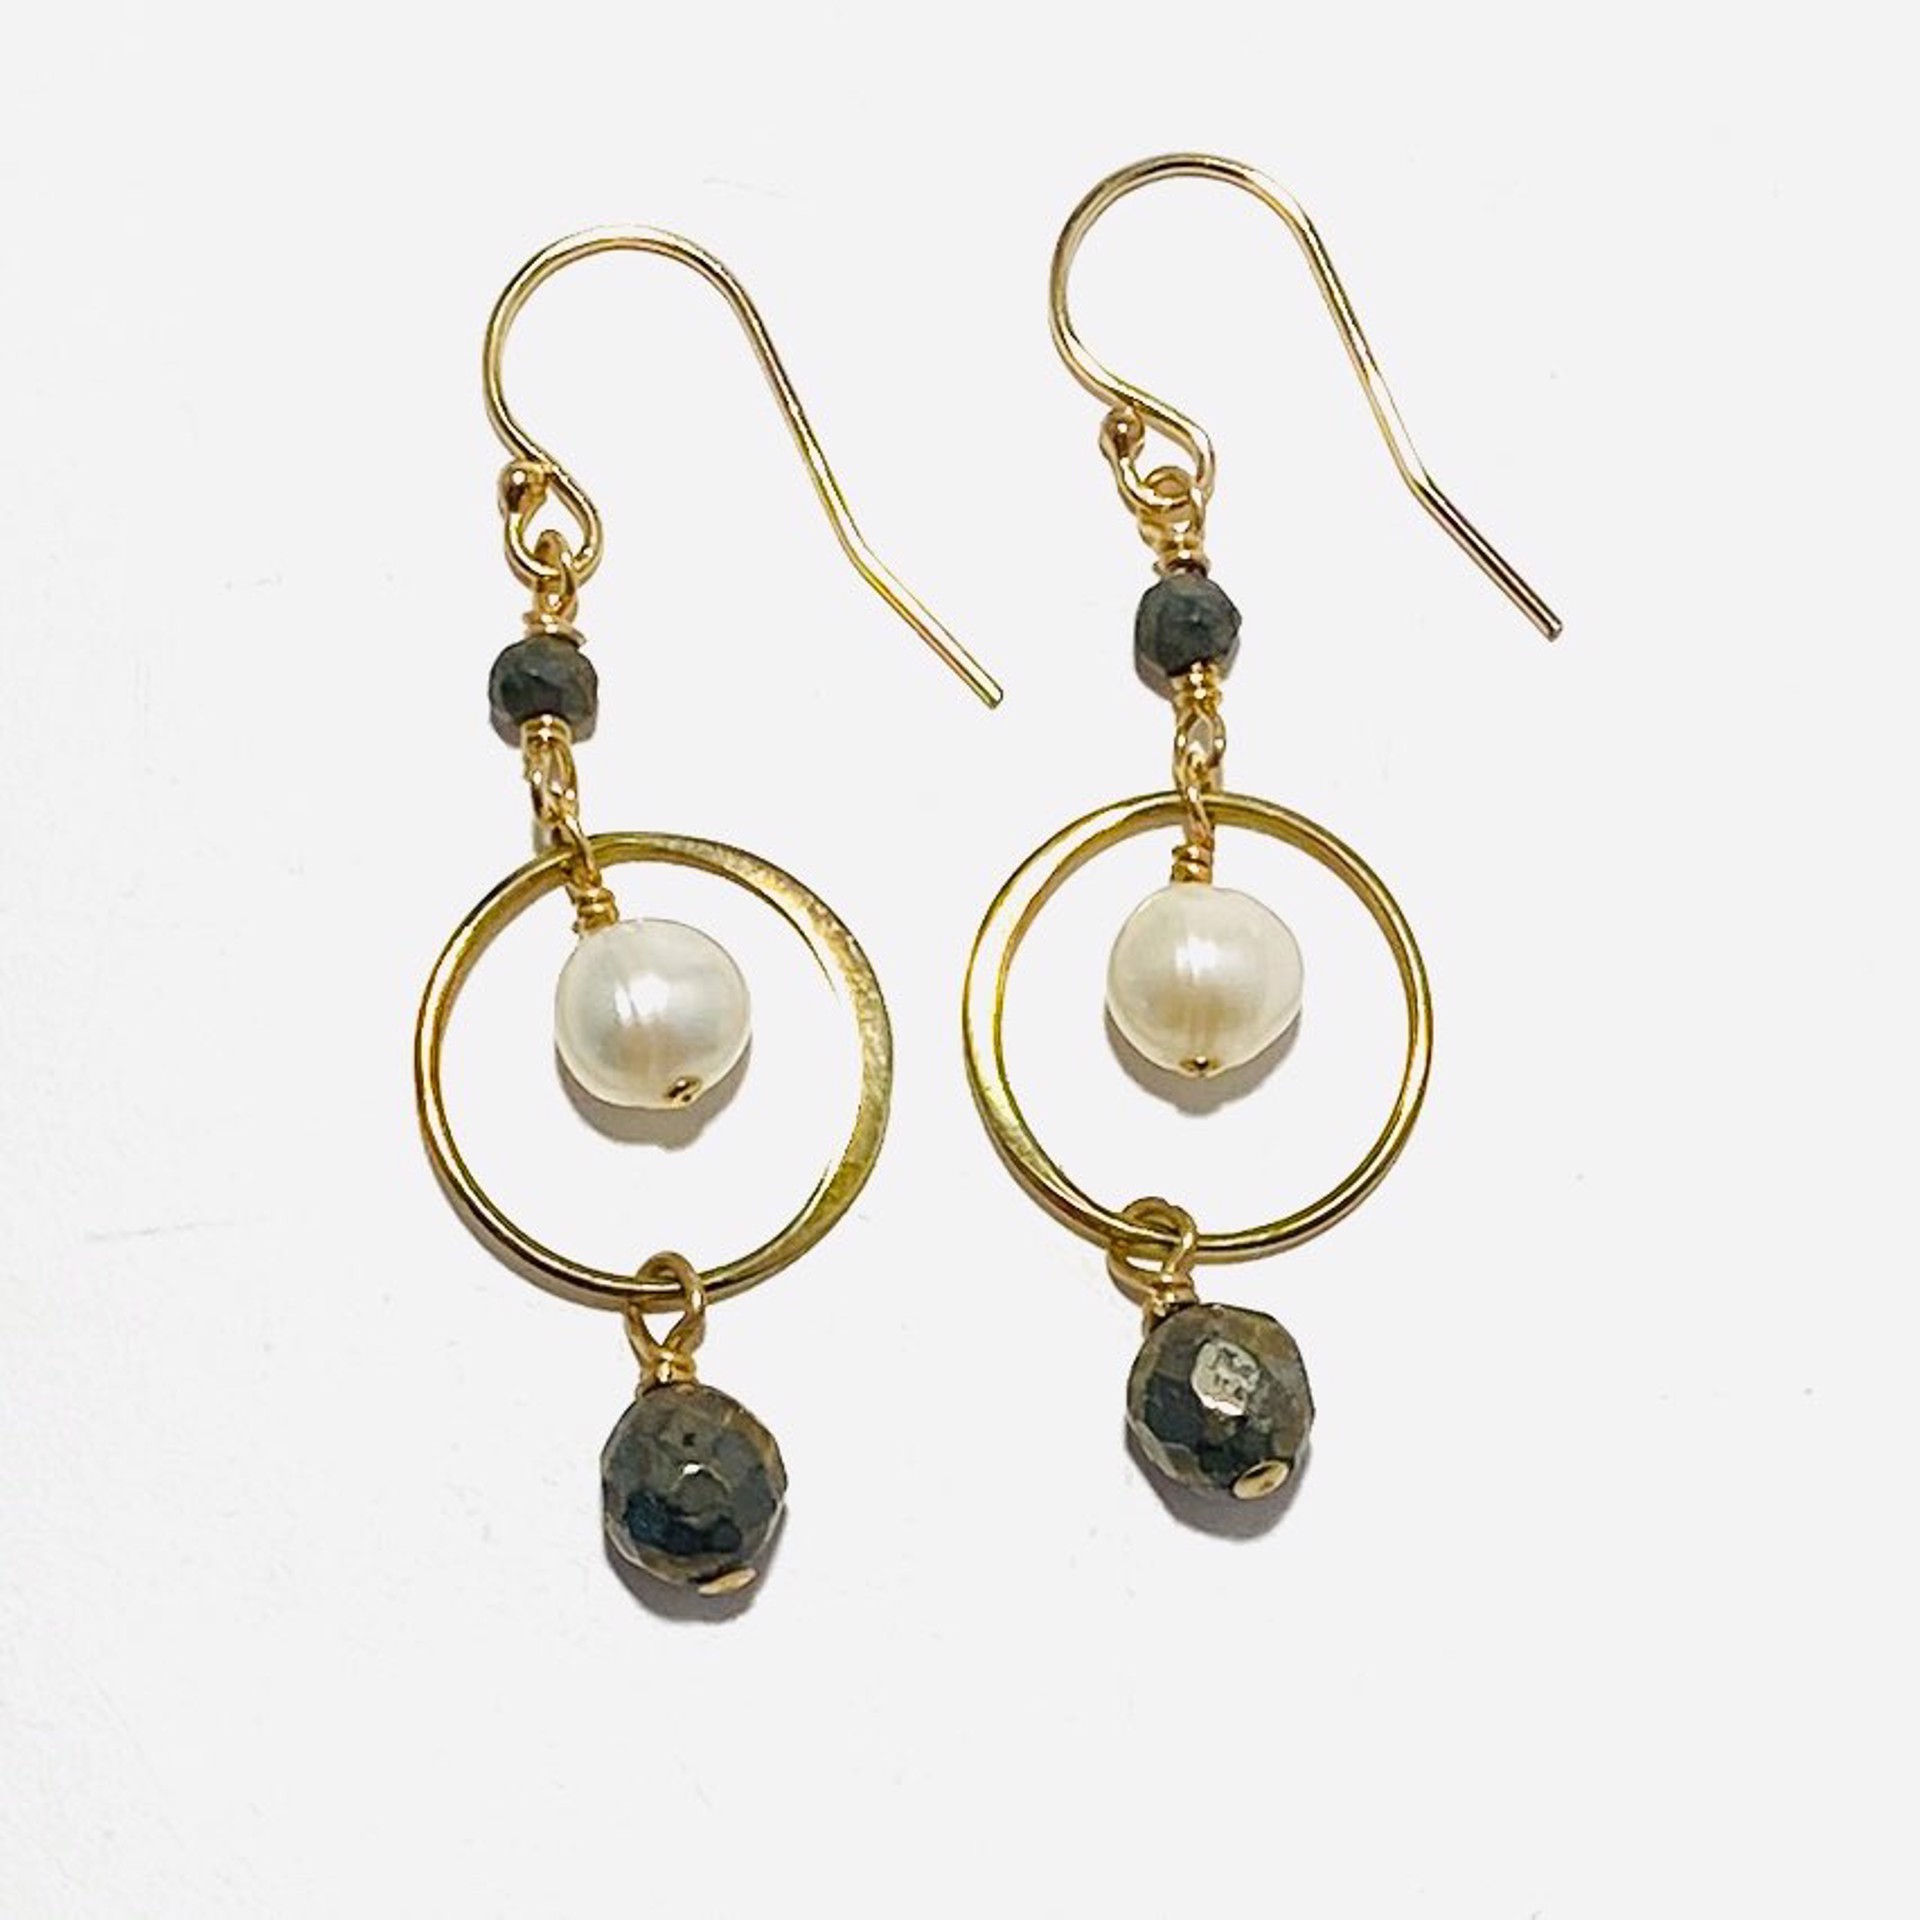 Faceted Pyrite, White Pearl Circle Drop GF Earrings LR23-41 by Legare Riano